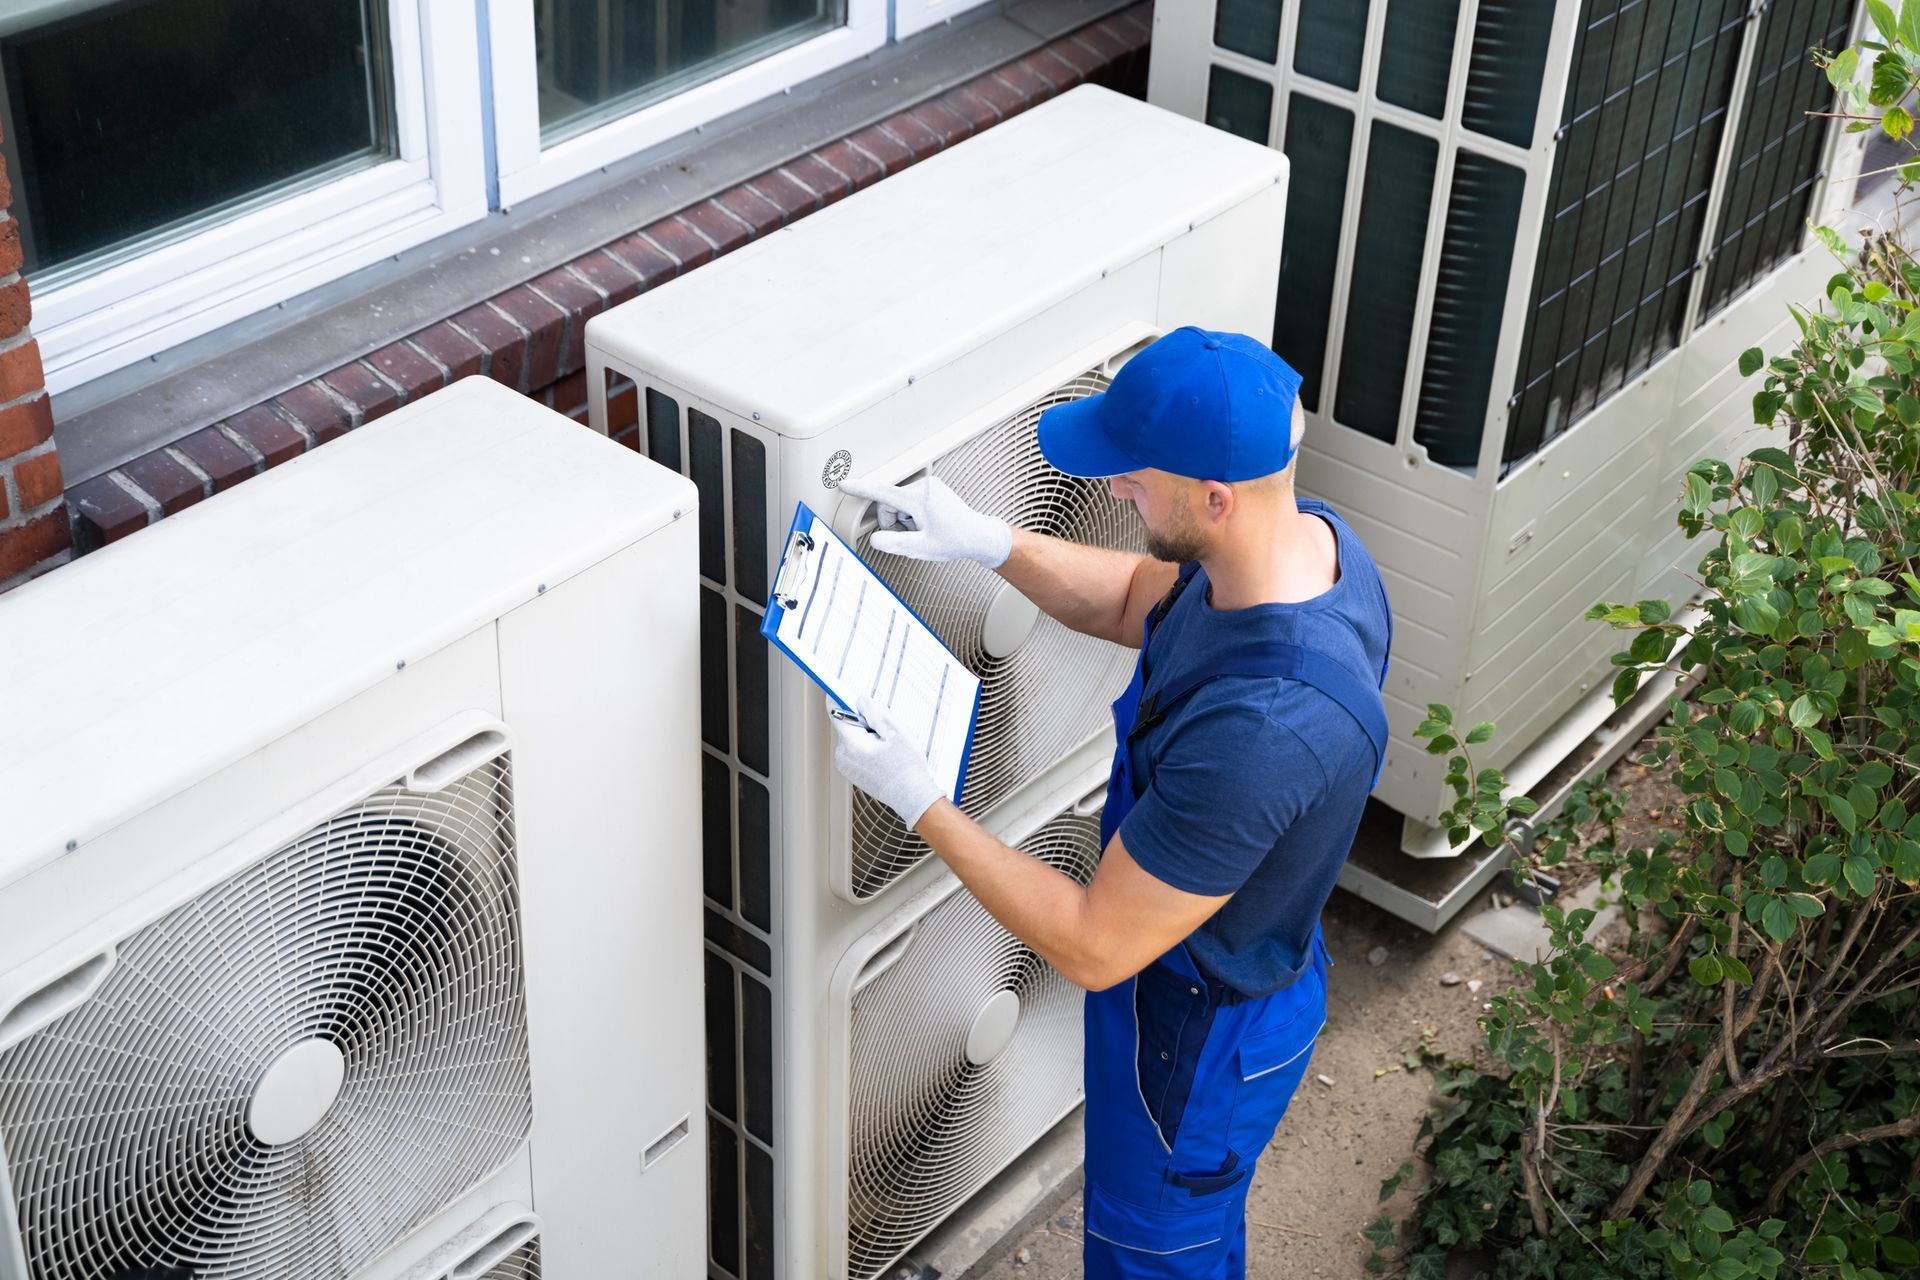 Ocean Air Cooling technician checking air conditioning unit.